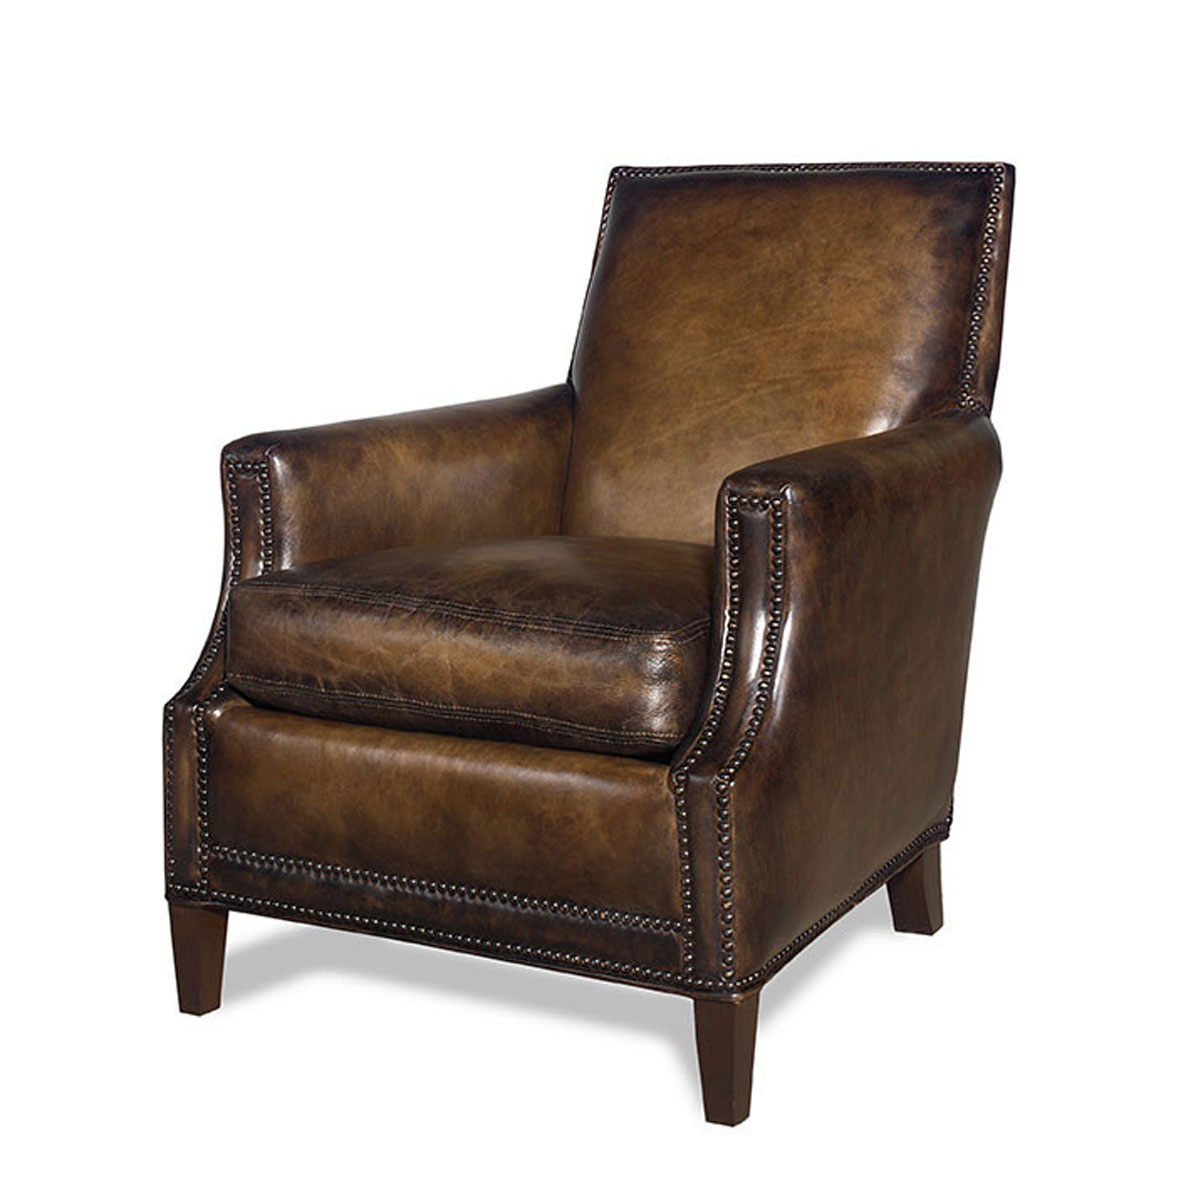 125 Catalina Chair by CC Leather